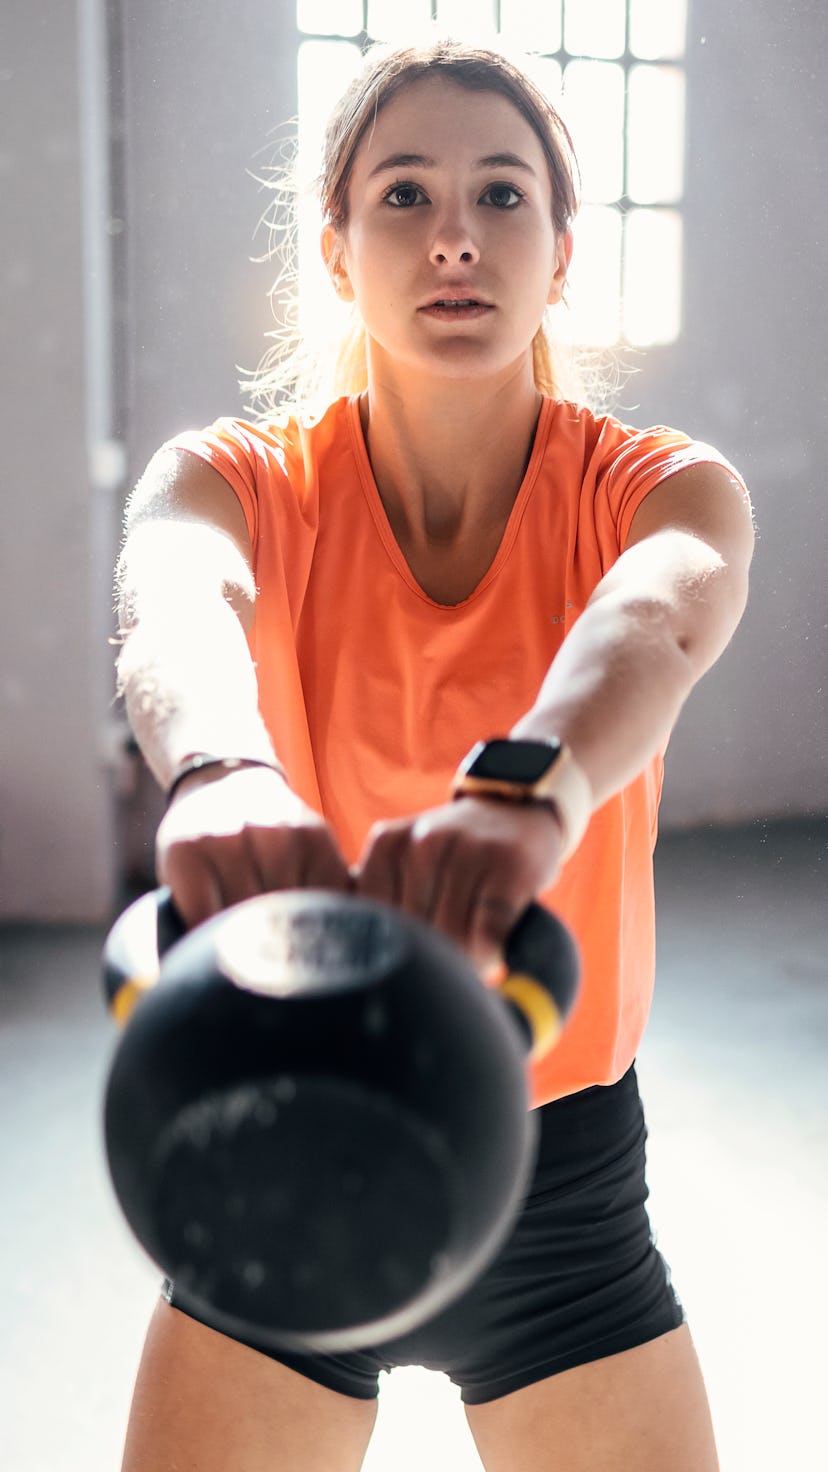 A woman in an orange shirt doing a kettlebell workout for her glutes